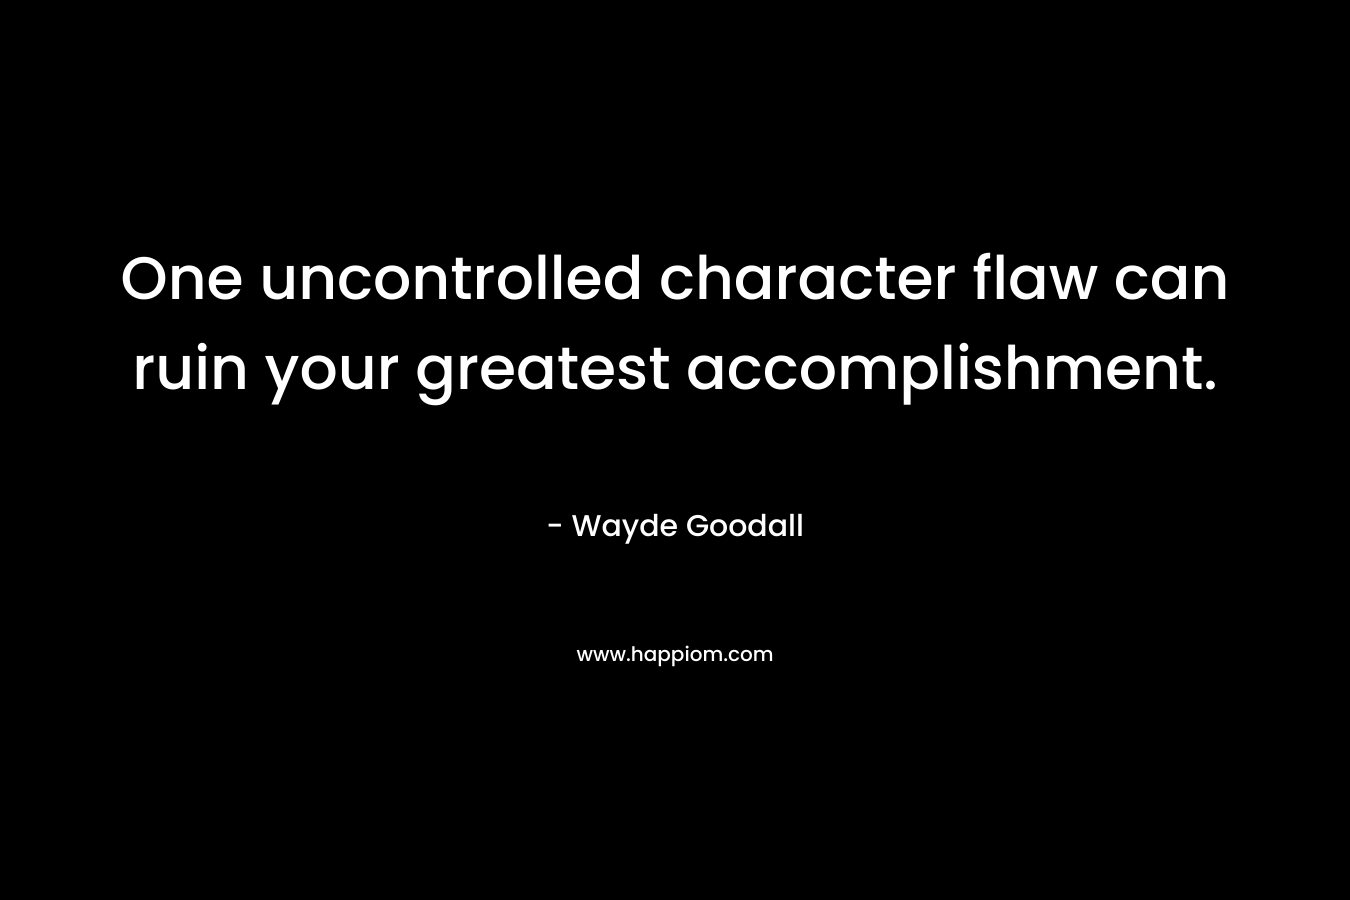 One uncontrolled character flaw can ruin your greatest accomplishment. – Wayde Goodall